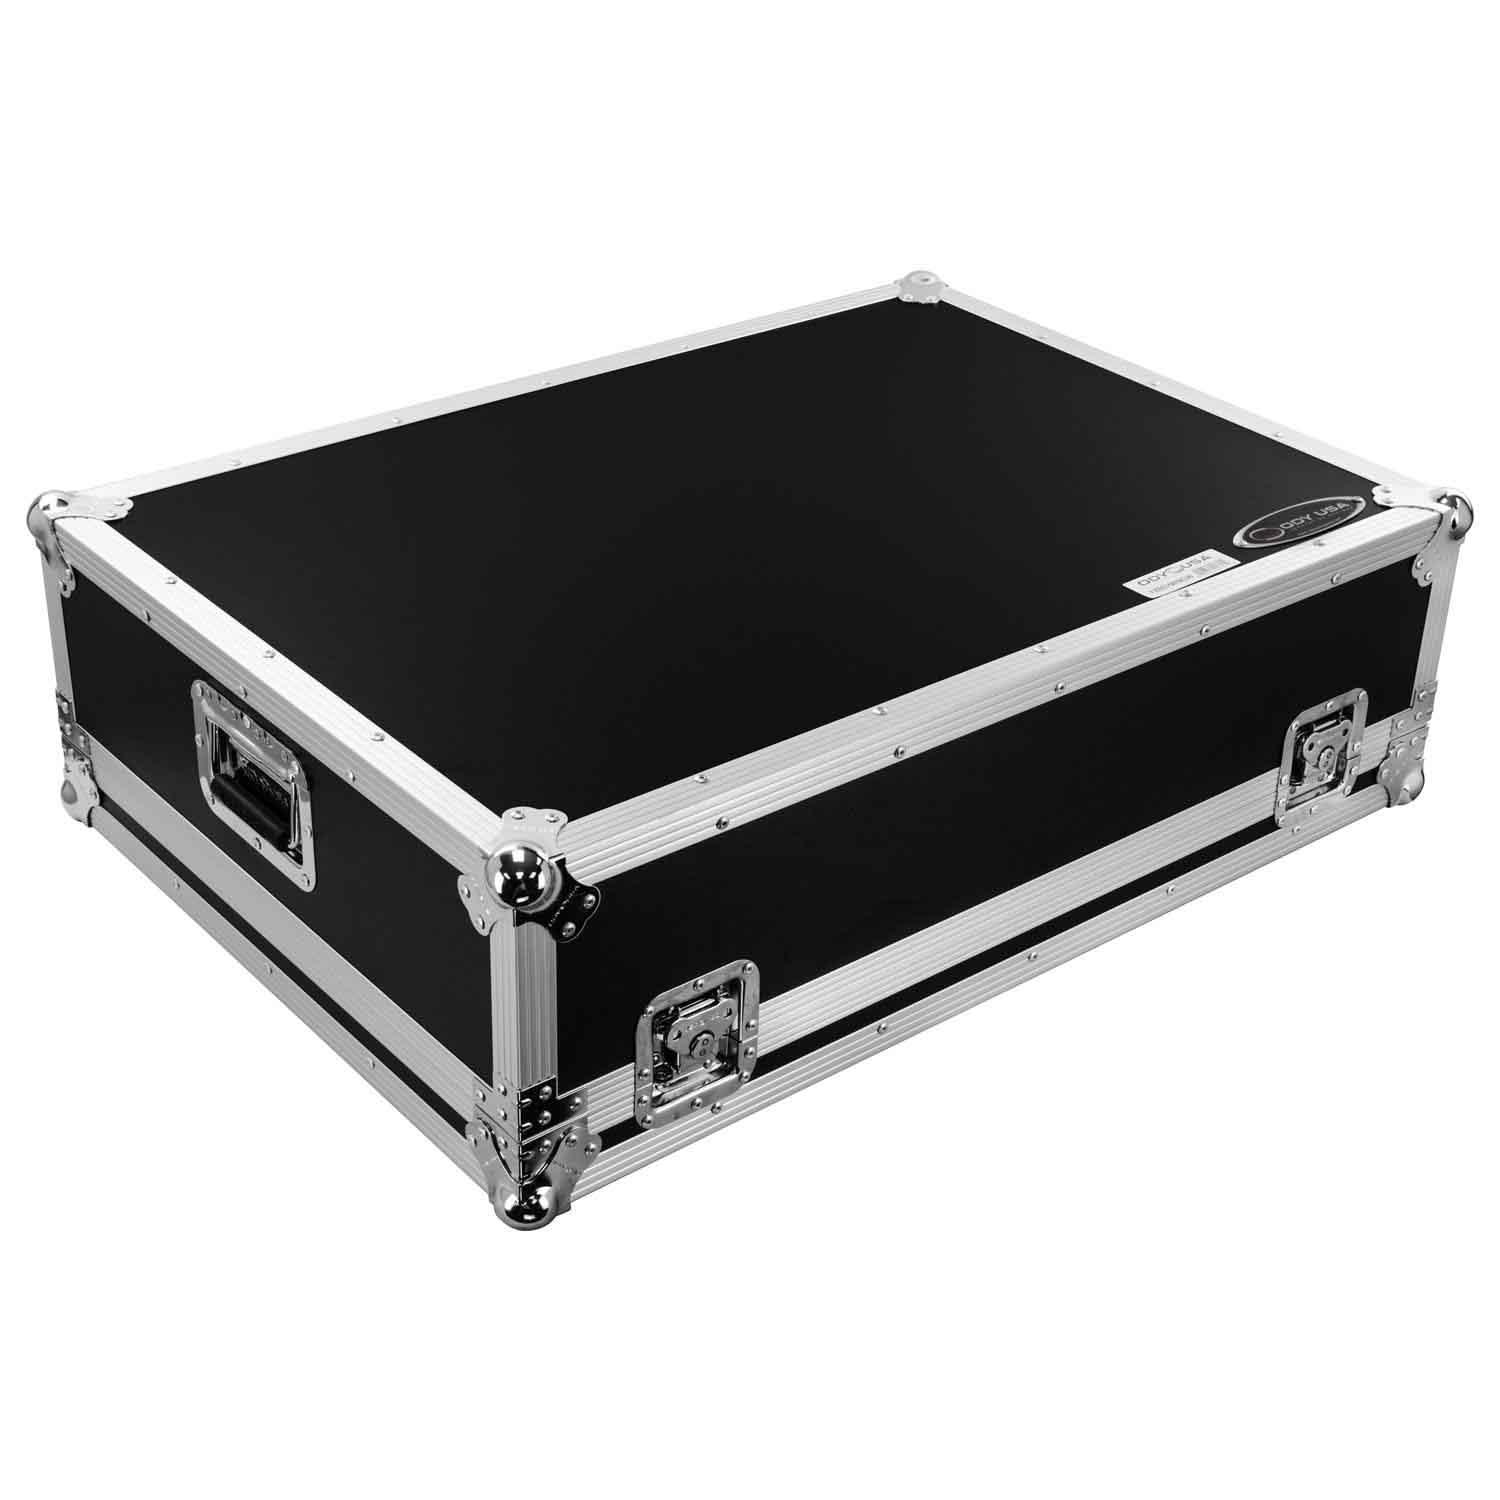 Odyssey FZBEHWINGW ATA Flight Case for Behringer Wing with Wheels Odyssey